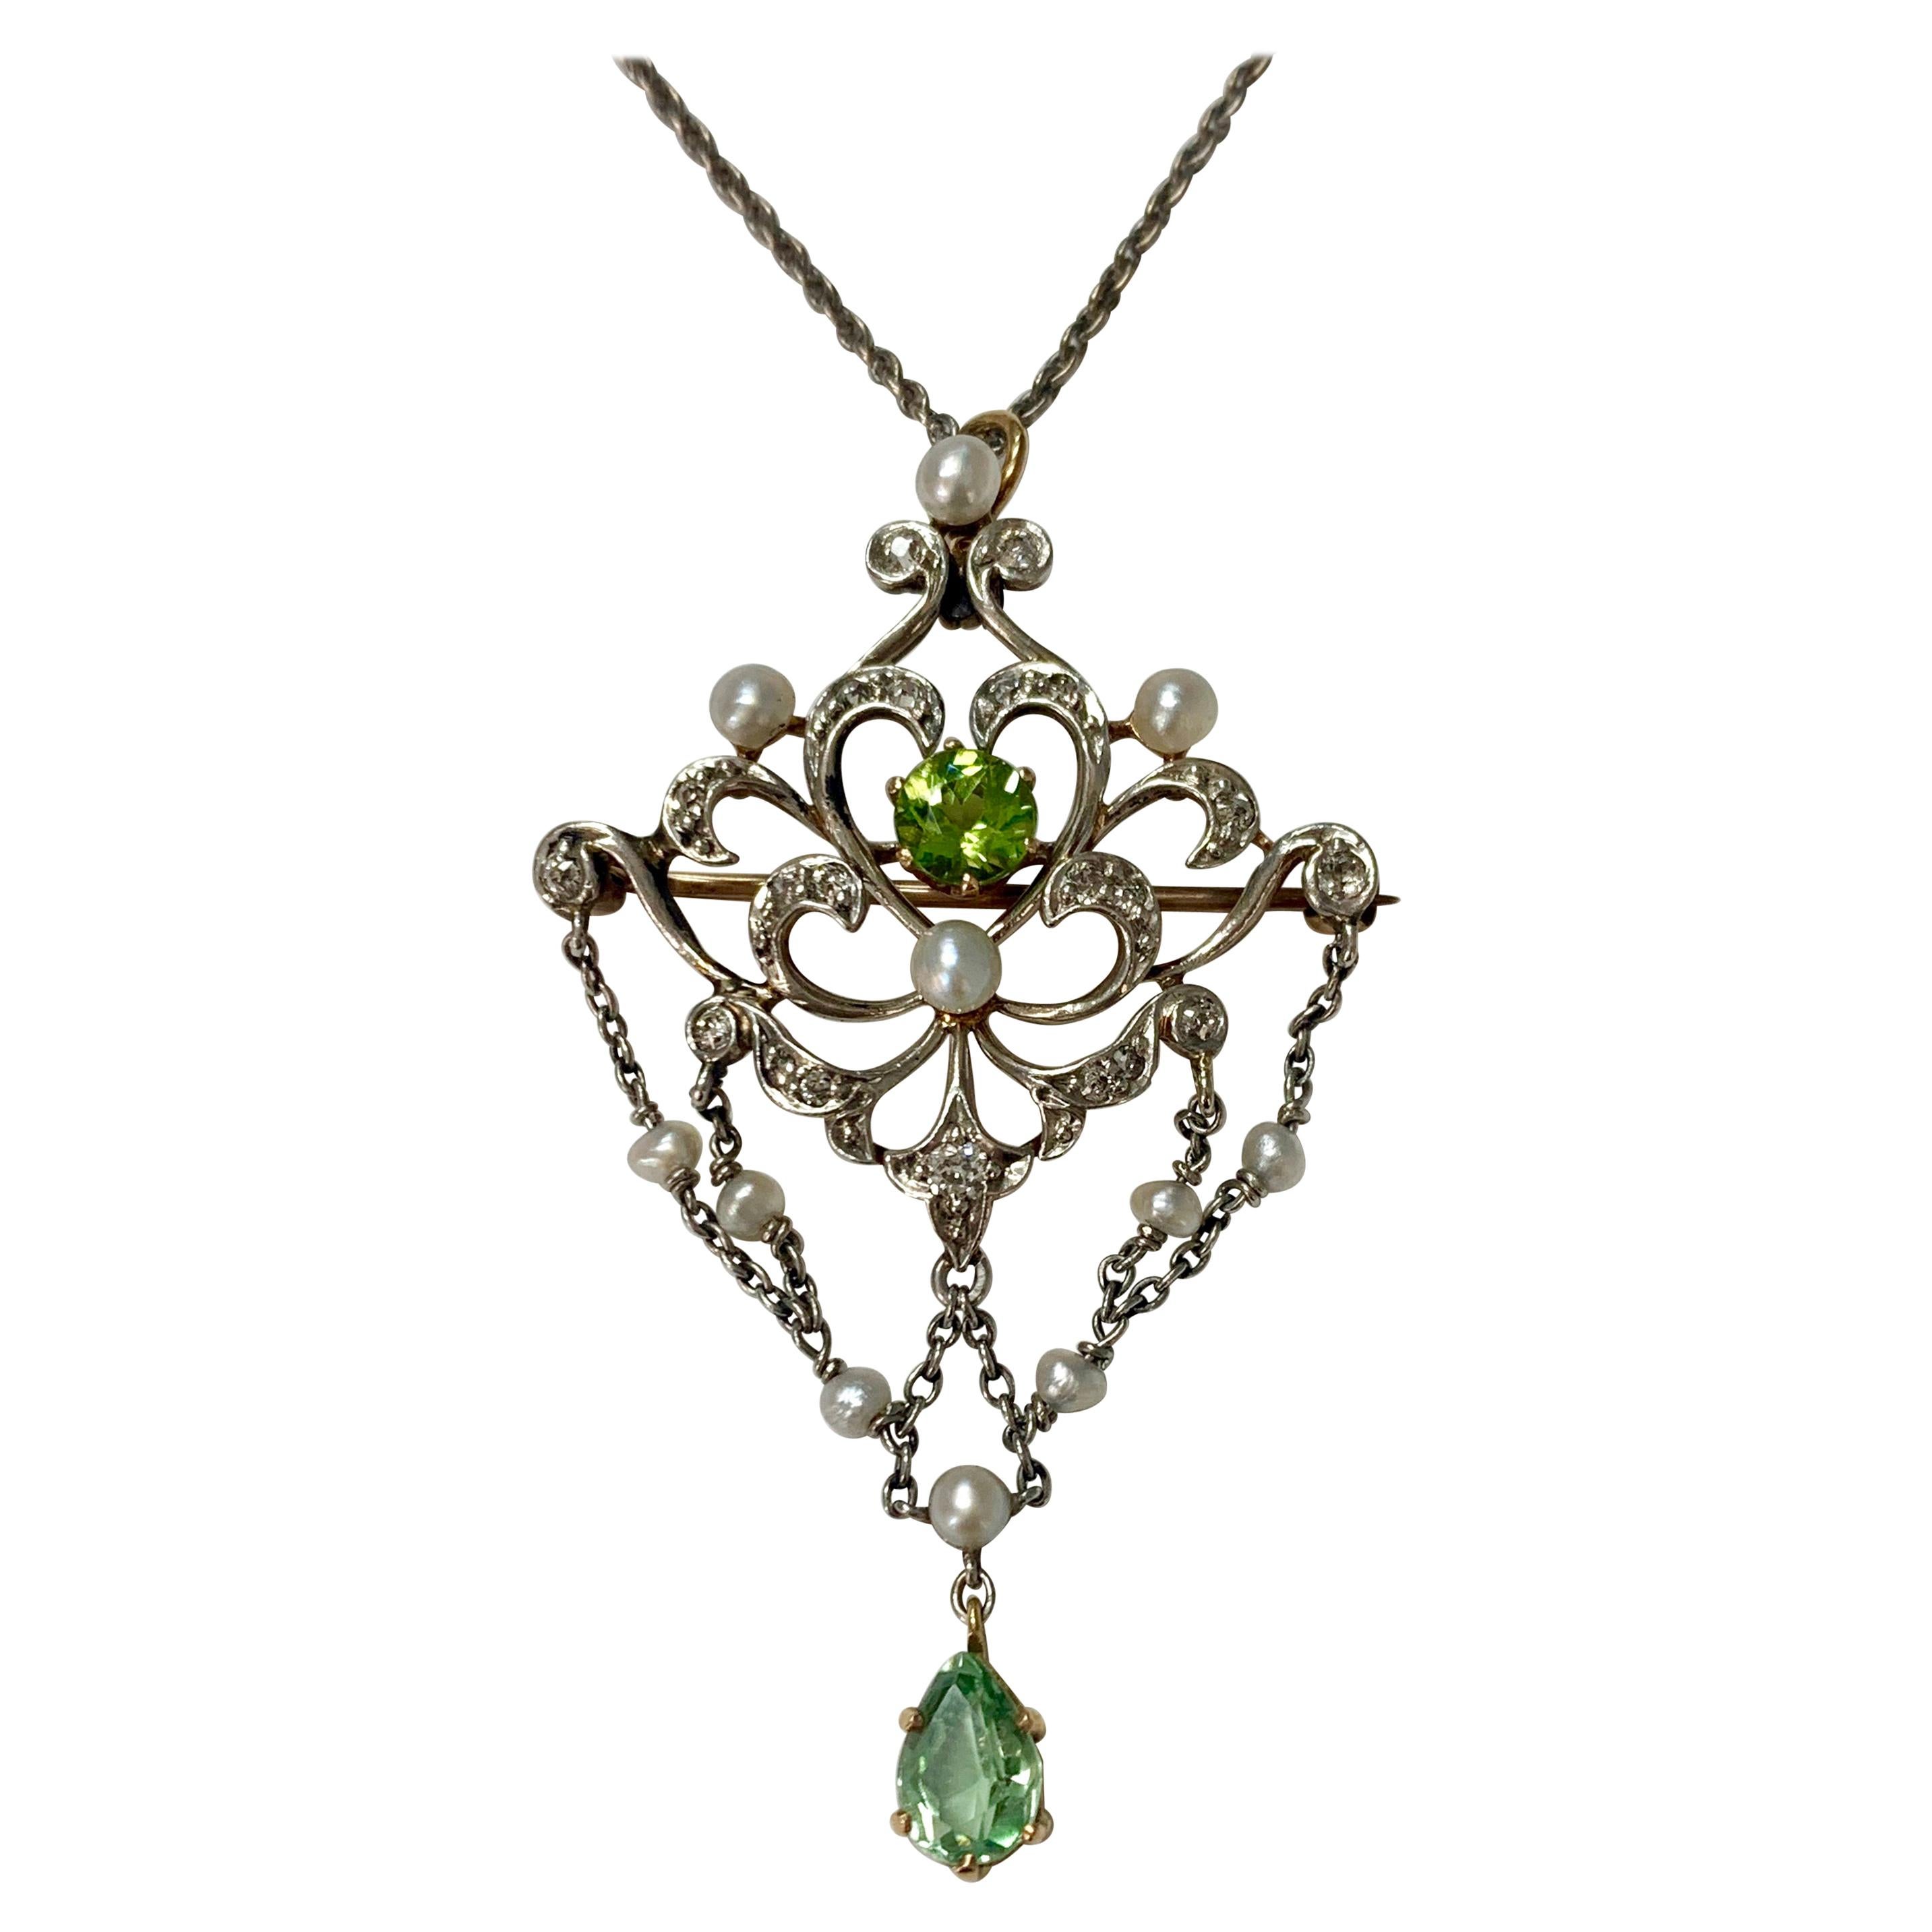 Antique Diamond Pearl and Peridot Necklace in 14K White Gold